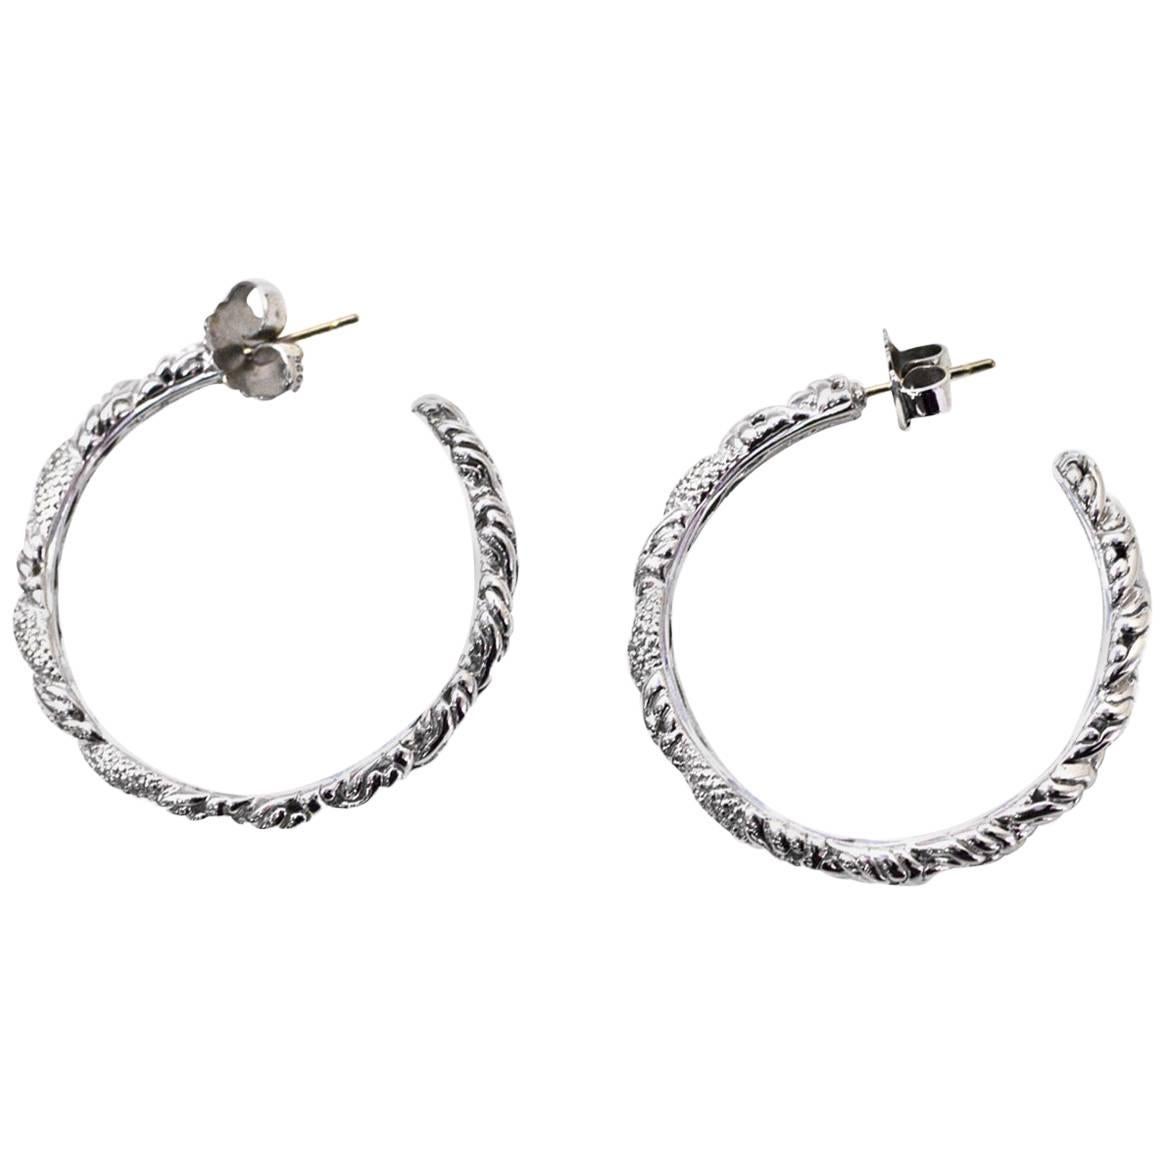 John Hardy Sterling Silver and Pave Diamond Hoop Earrings with Dust Bag